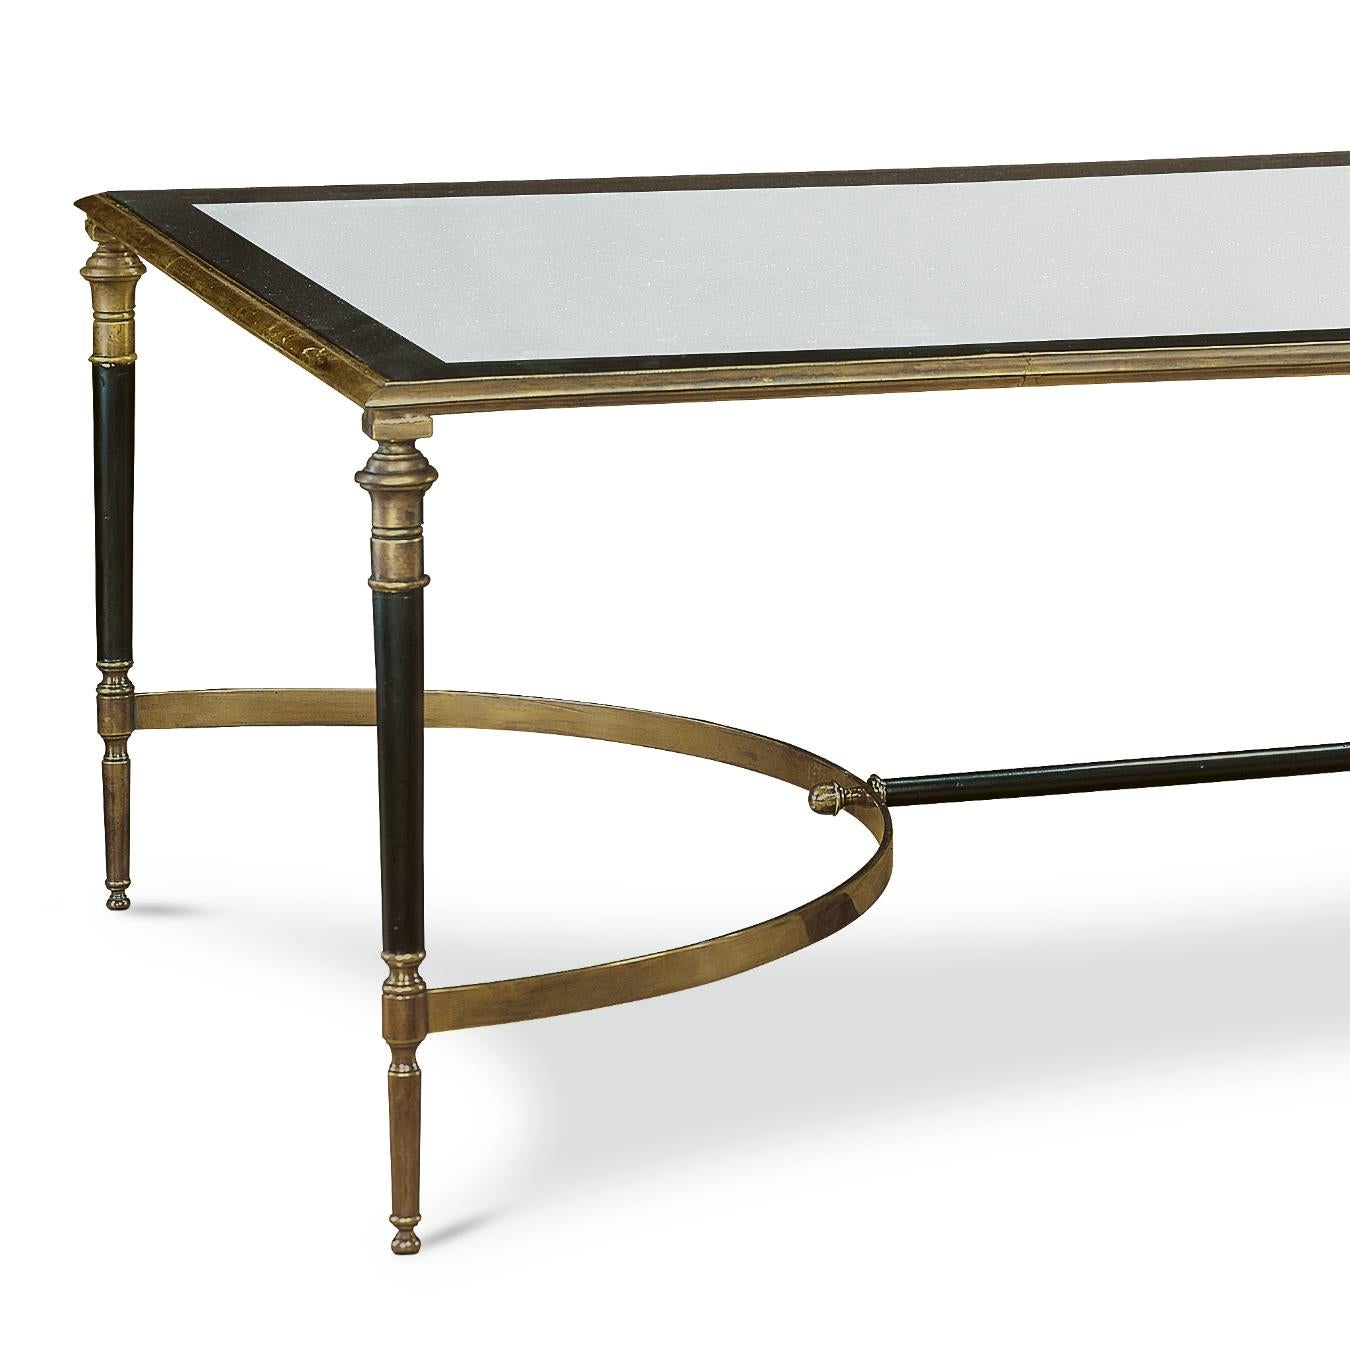 This finely constructed cocktail table has stunning brass frame and glass top. The legs are made of dark wood and brass with a symmetrical brass stretcher that rests beneath its surface.
   